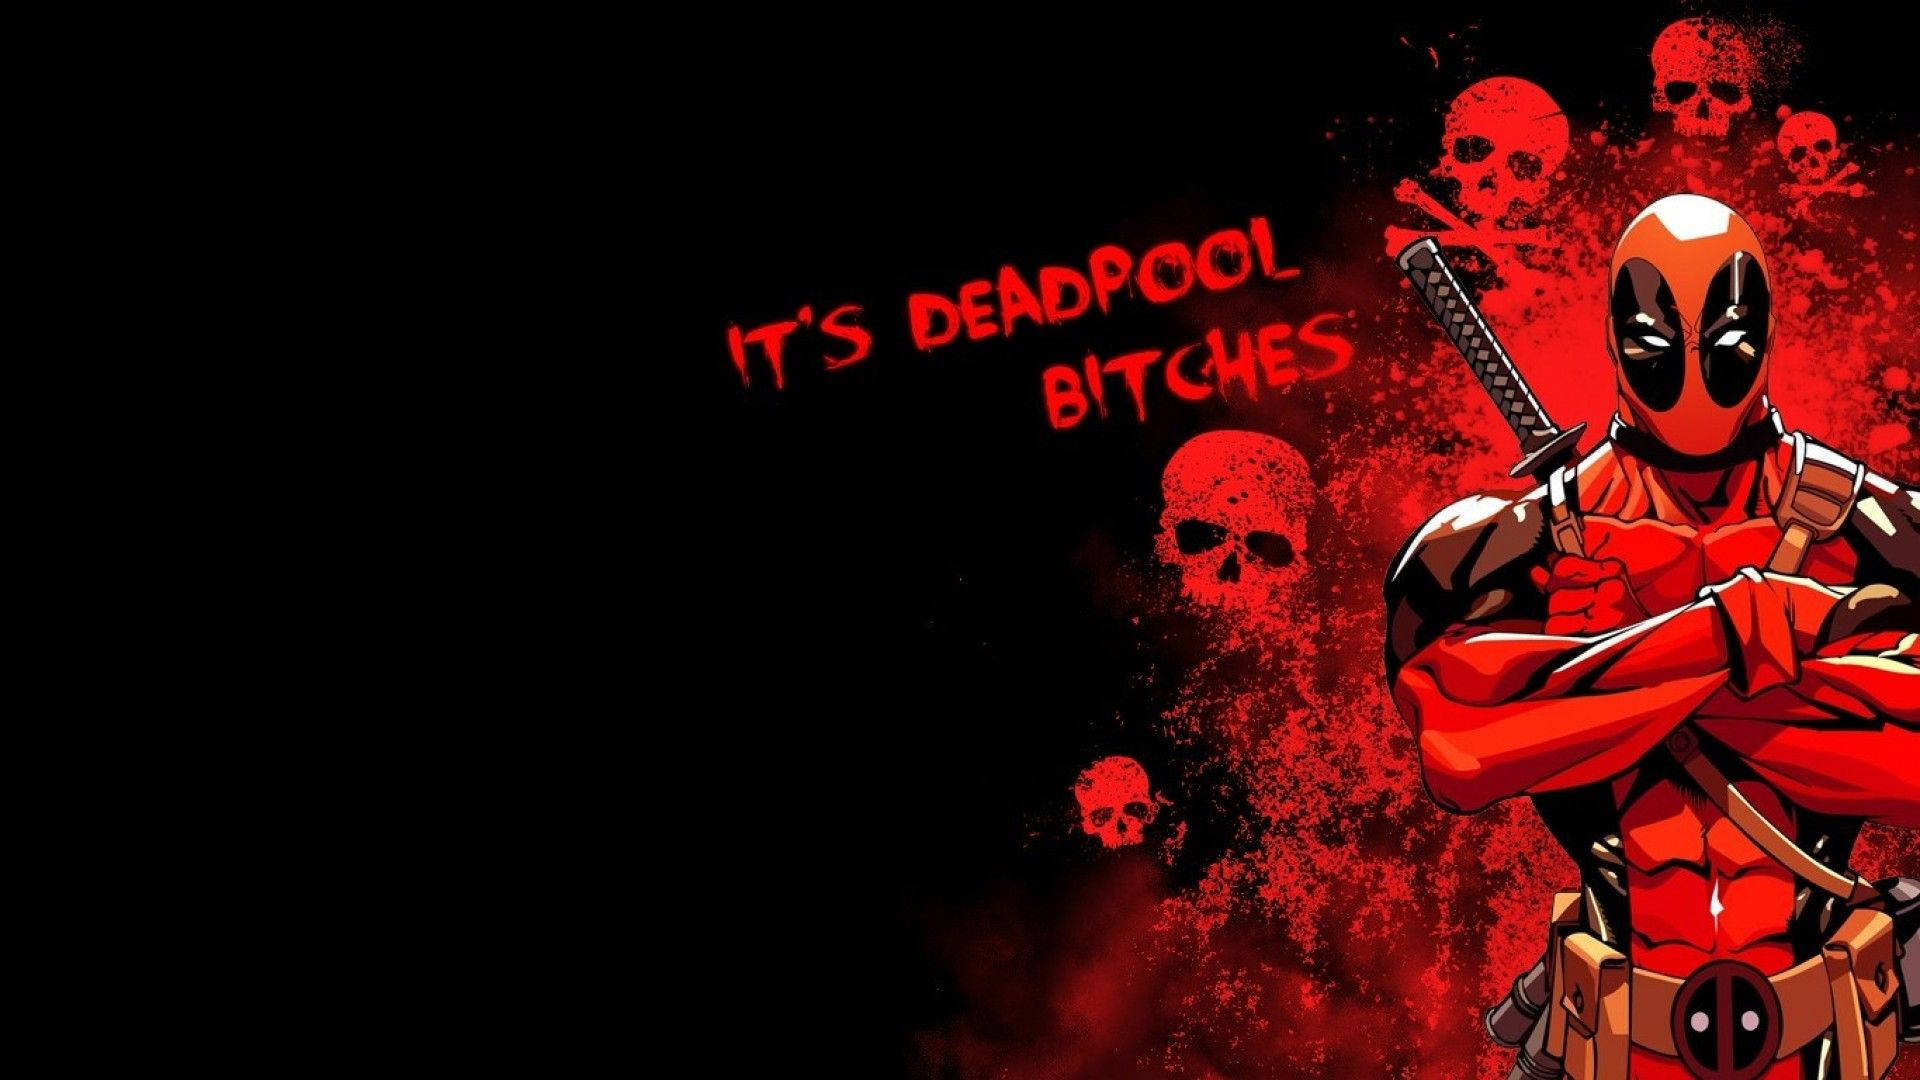 It's Deadpool Bitches Background